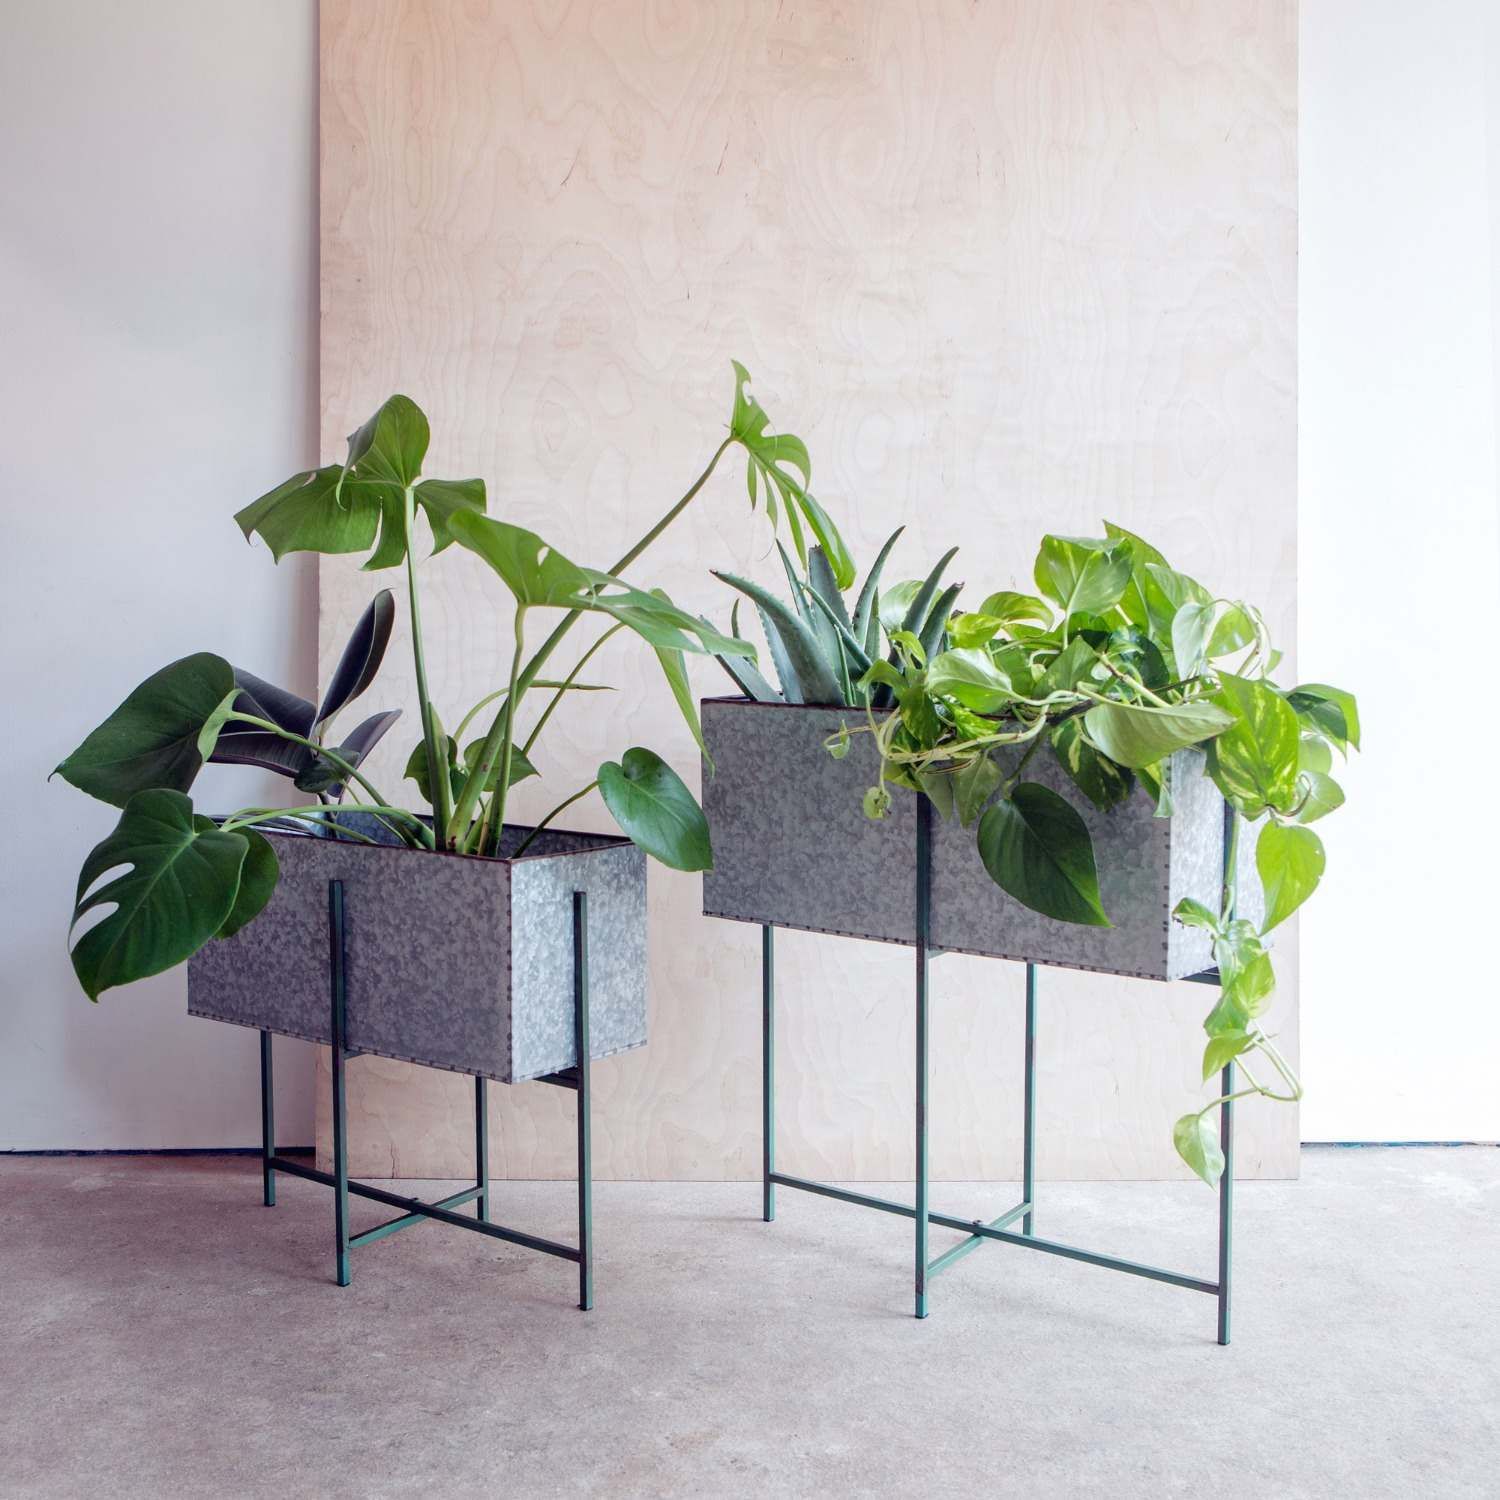 Set Of Two Rectangular Zinc Plant Stands | Graham & Green In Rectangular Plant Stands (View 1 of 15)